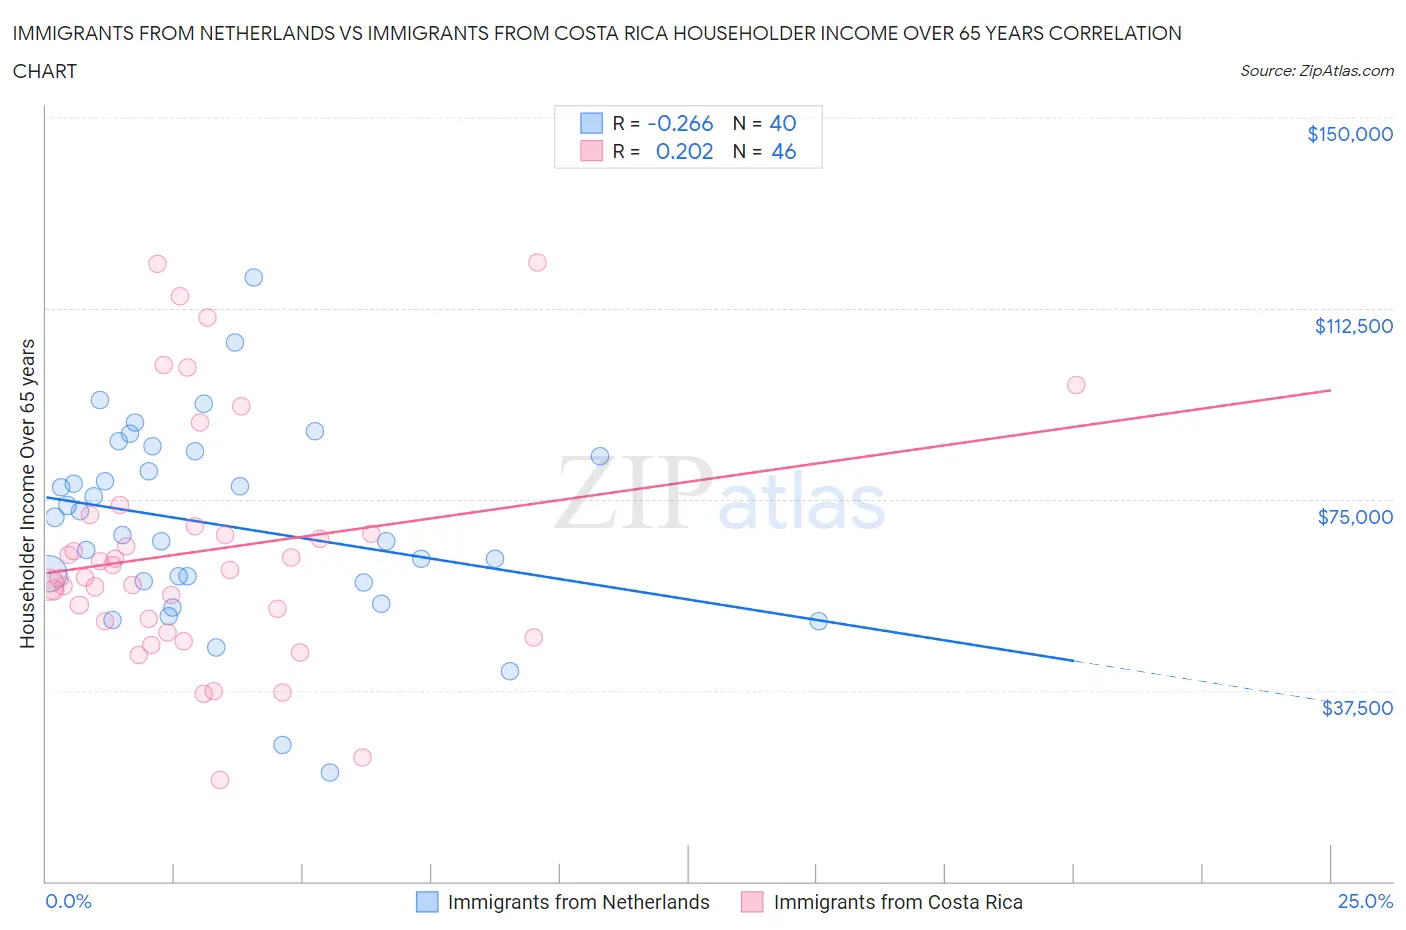 Immigrants from Netherlands vs Immigrants from Costa Rica Householder Income Over 65 years